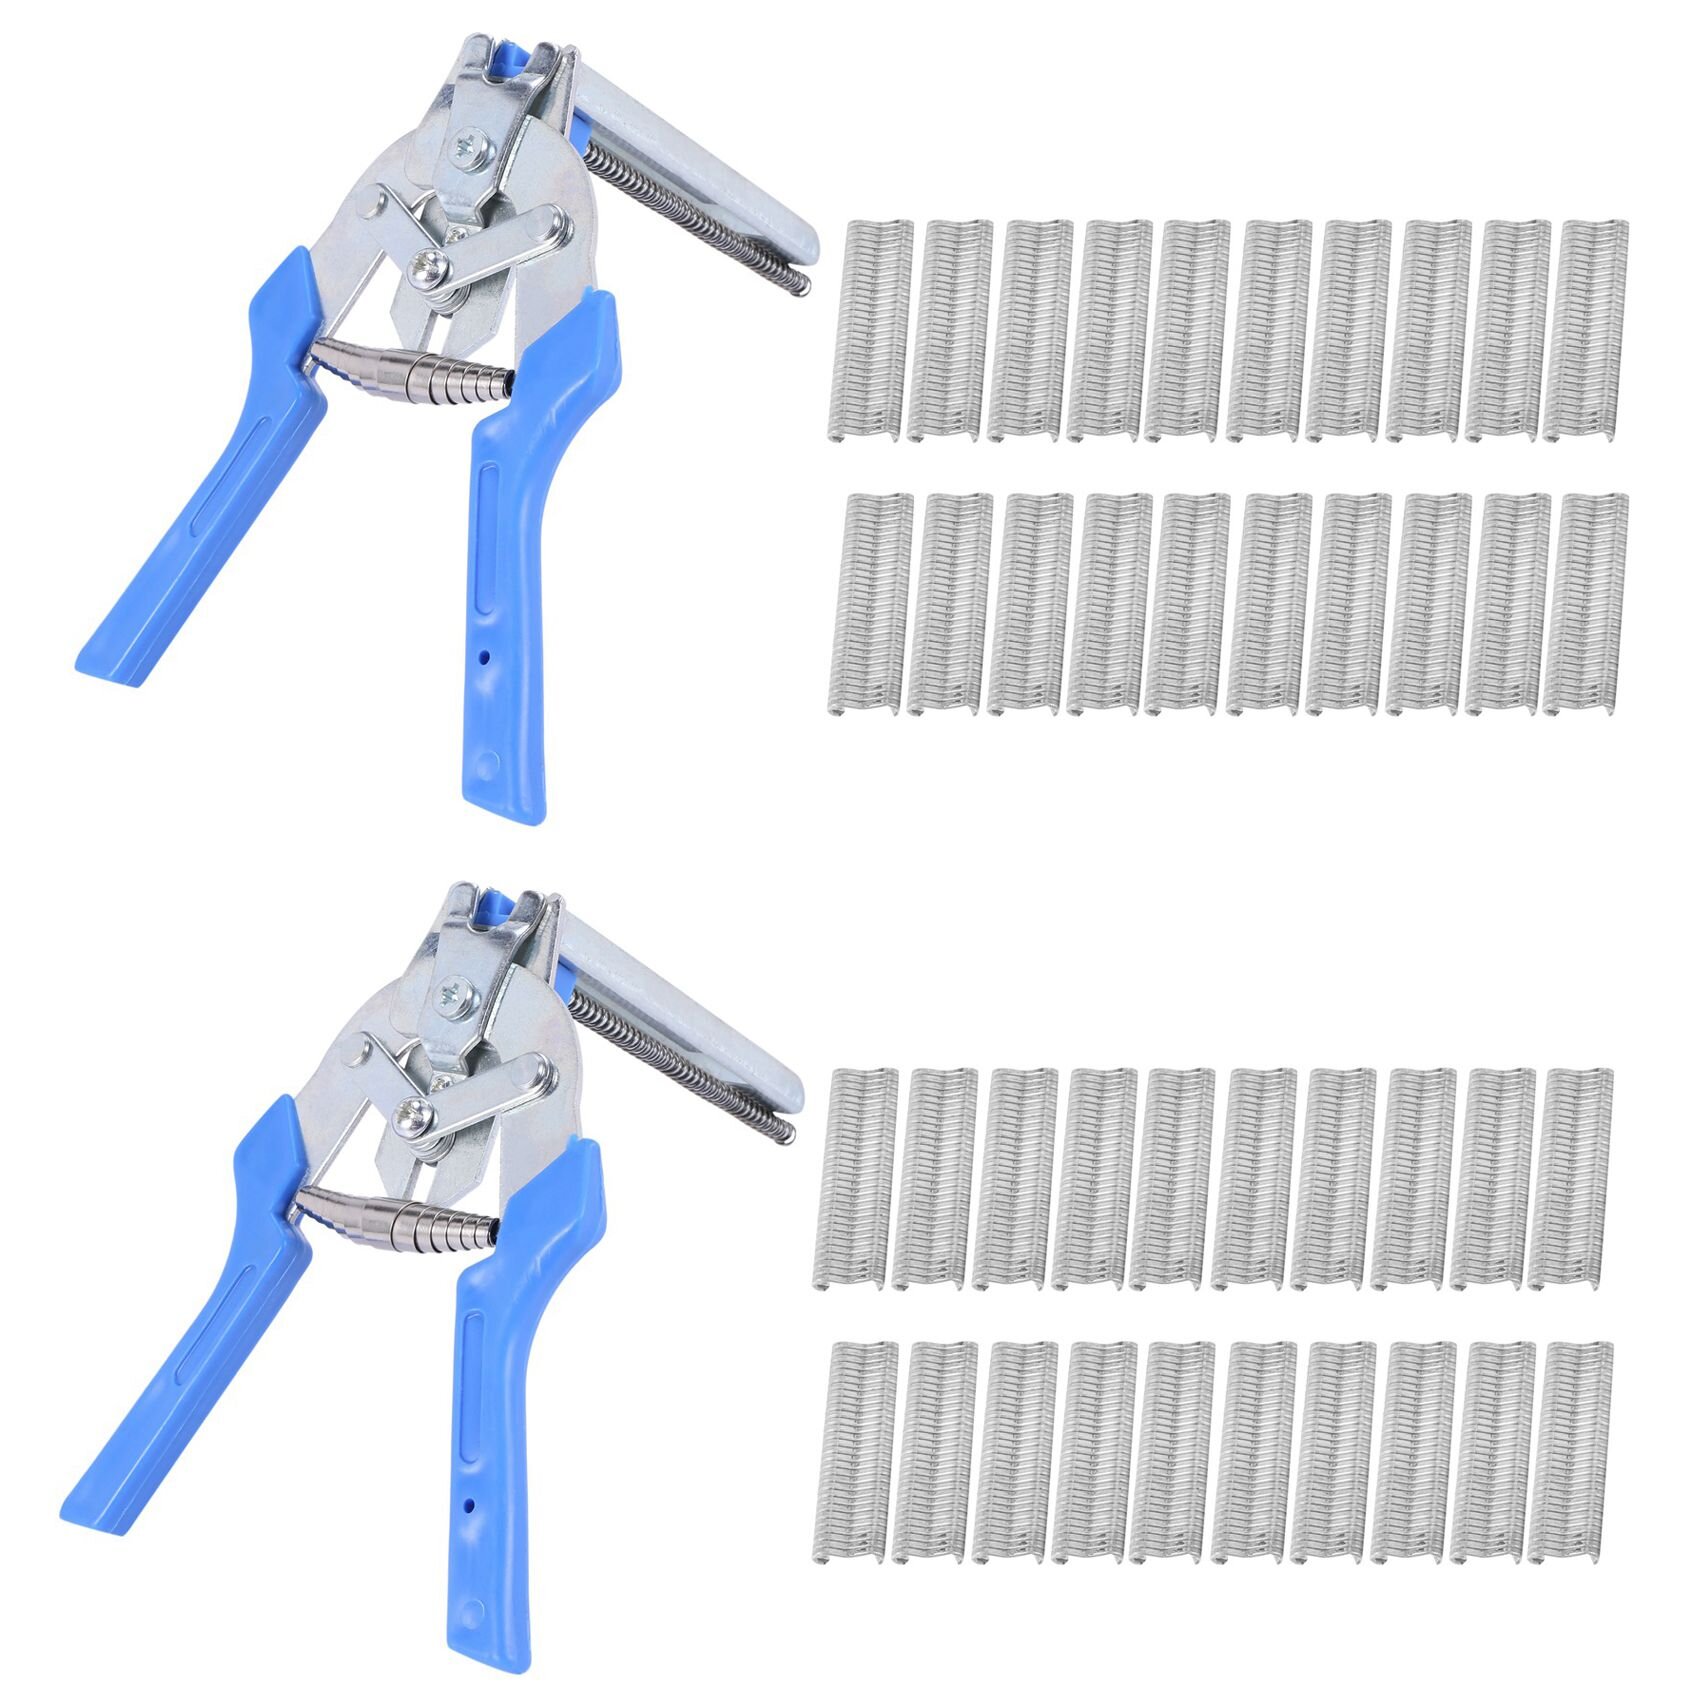 2Pc Hog Ring Plier Tool and 600Pcs M Clips Chicken Mesh Cage Wire Fencing Crimping Solder Joint